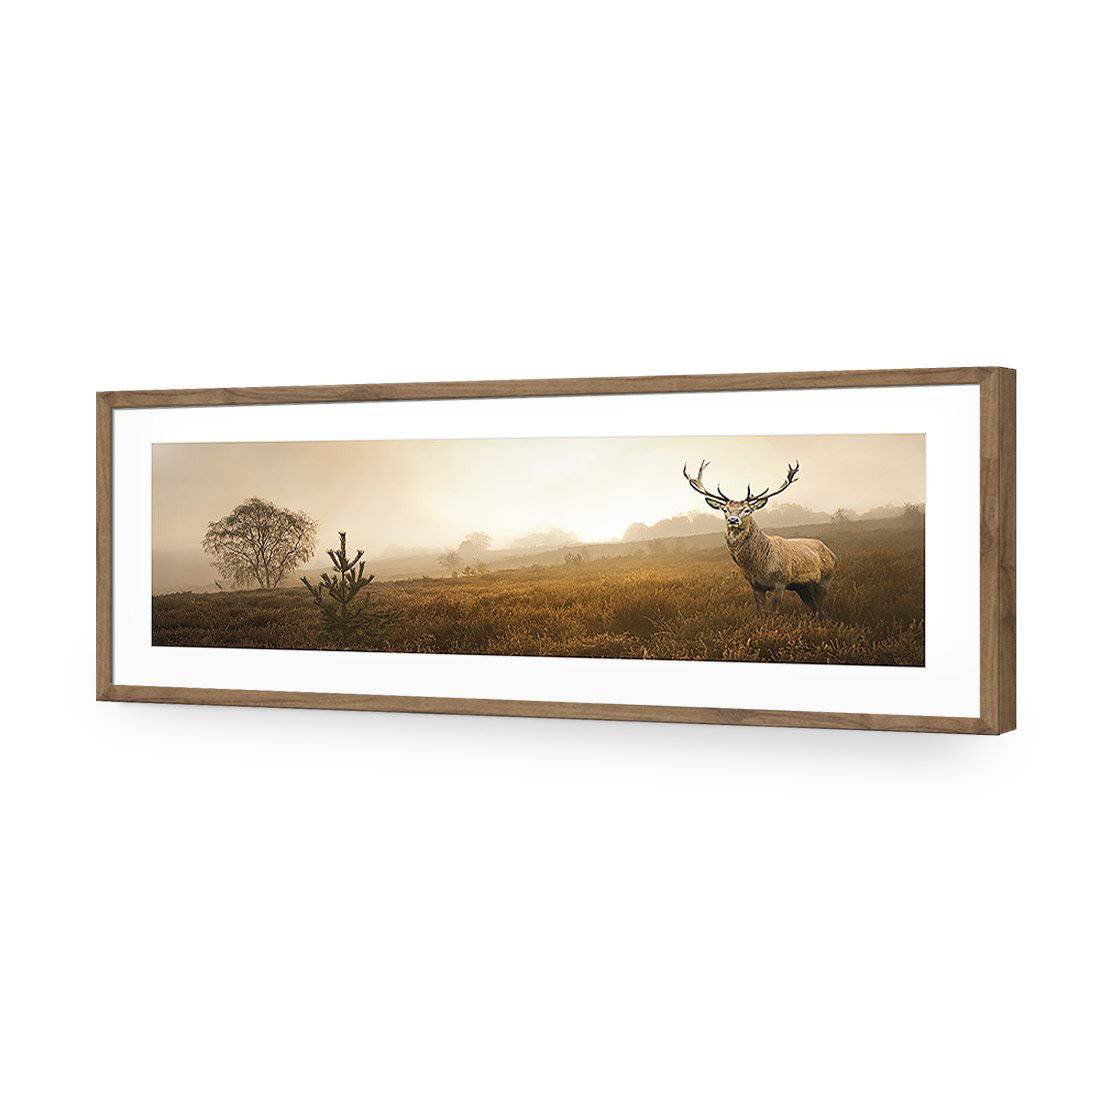 Morning Stag, Long-Acrylic-Wall Art Design-With Border-Acrylic - Natural Frame-60x20cm-Wall Art Designs